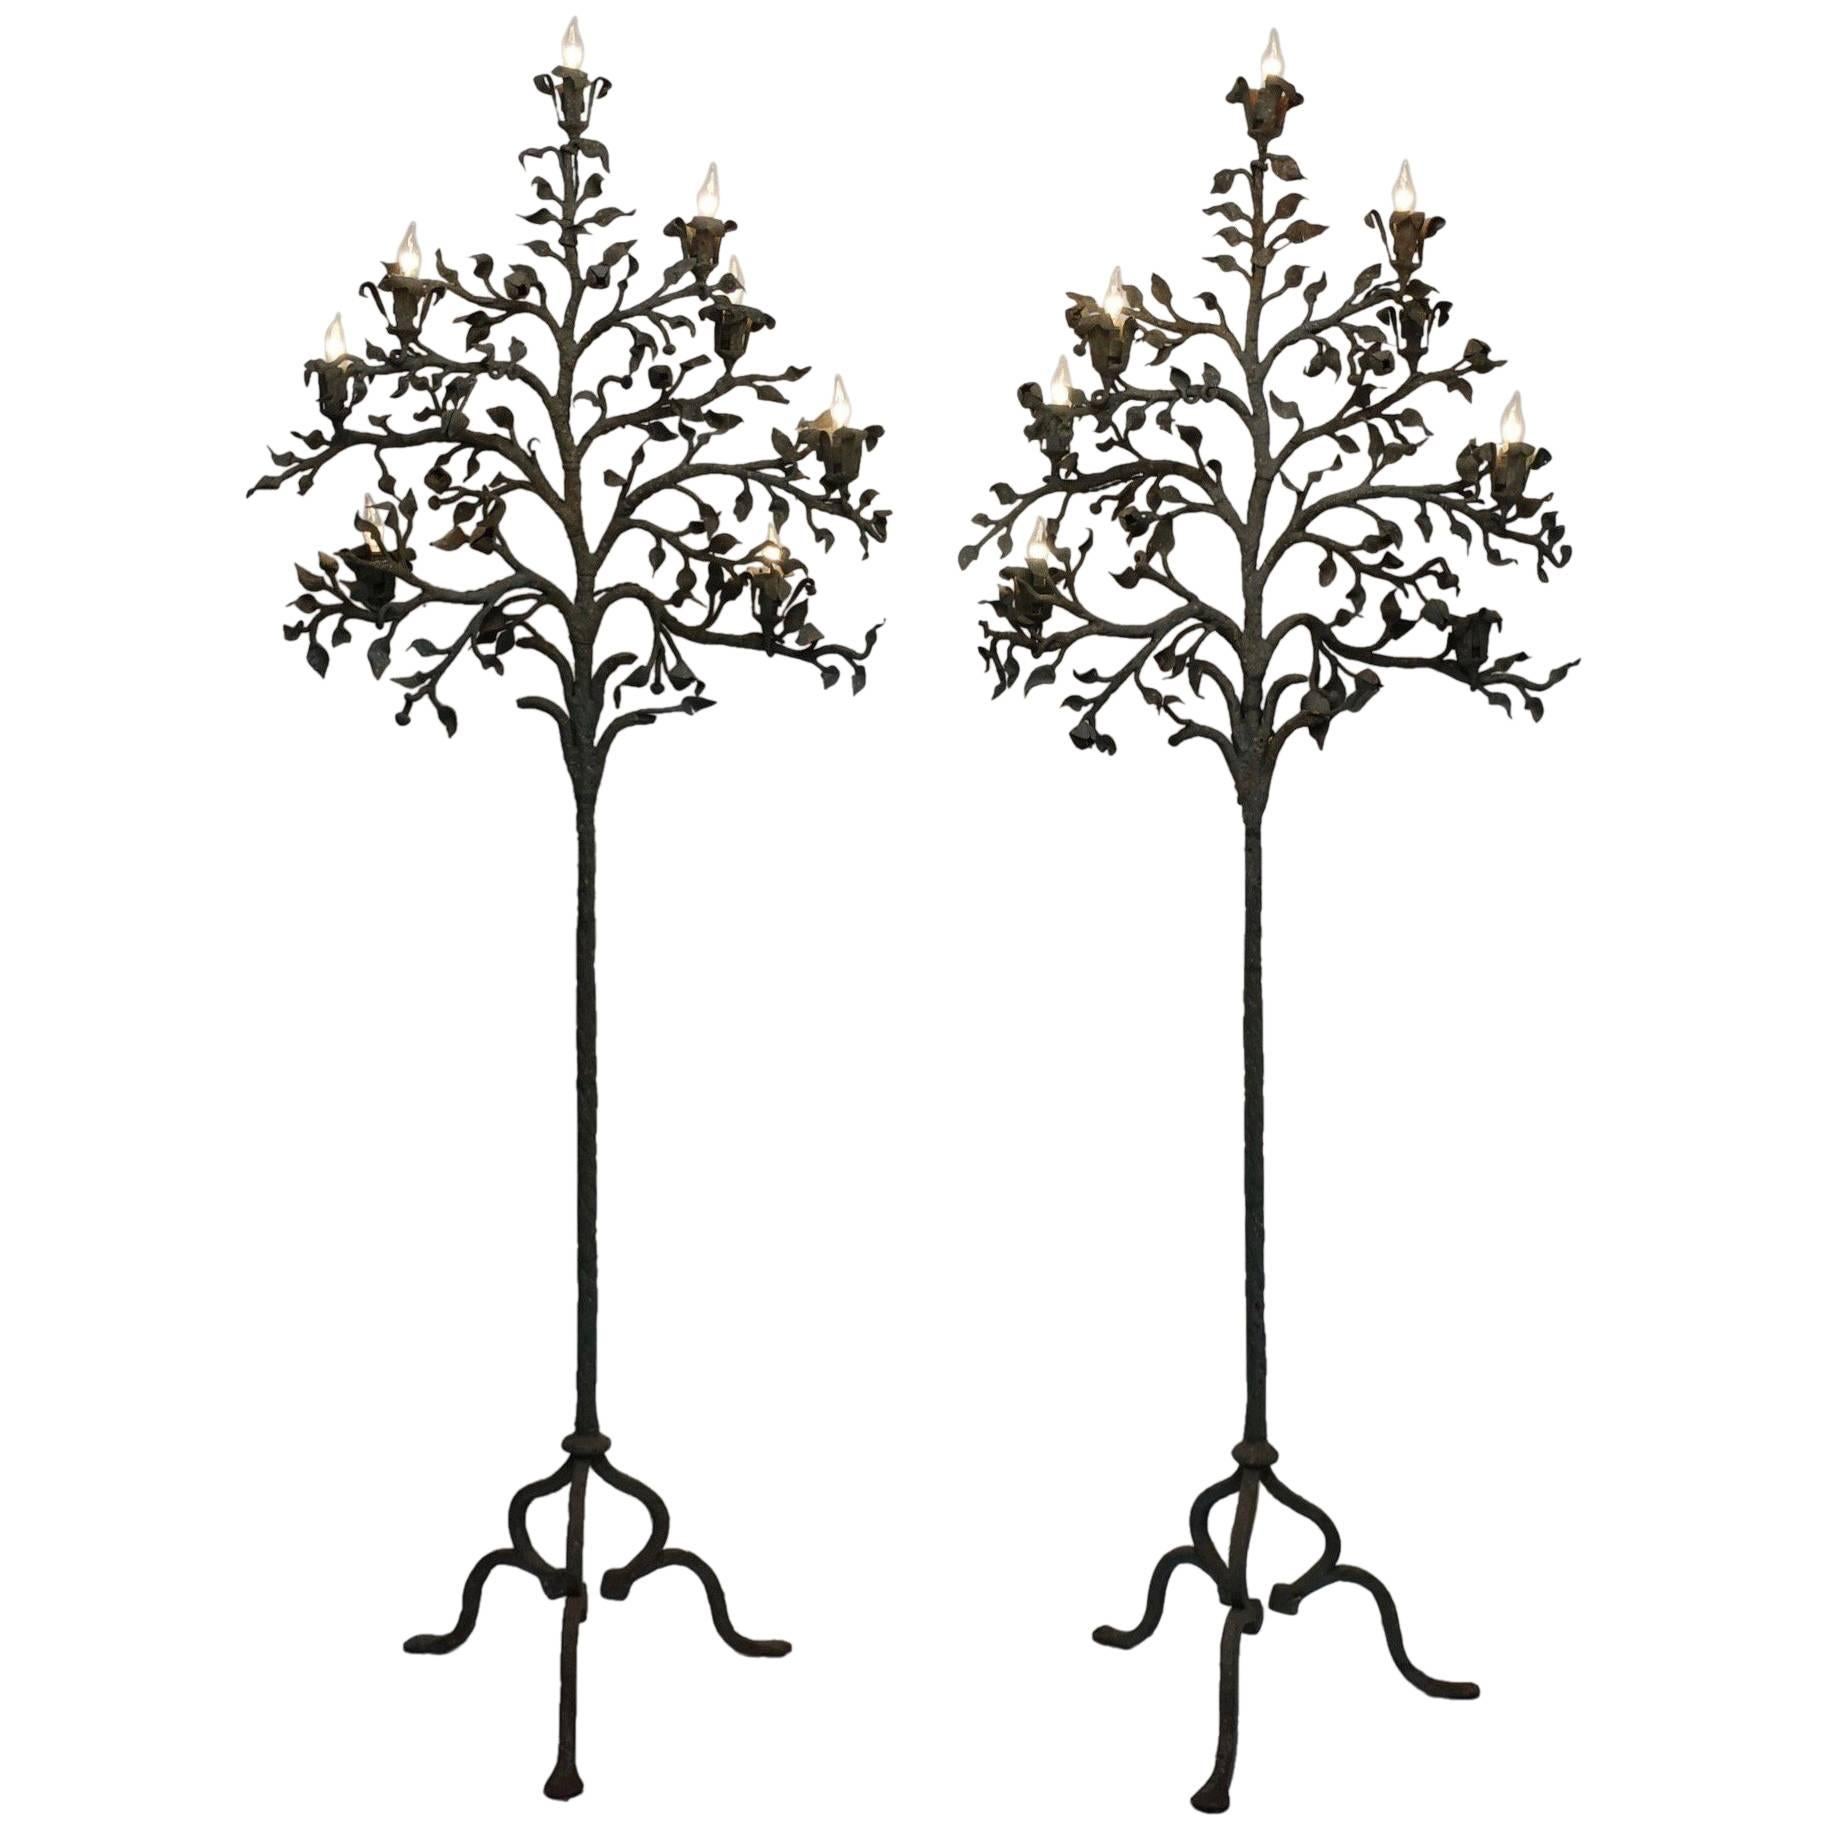 Pair of Wrought Iron Tree Form Torchiere Floor Lamps, Italy, 19th Century